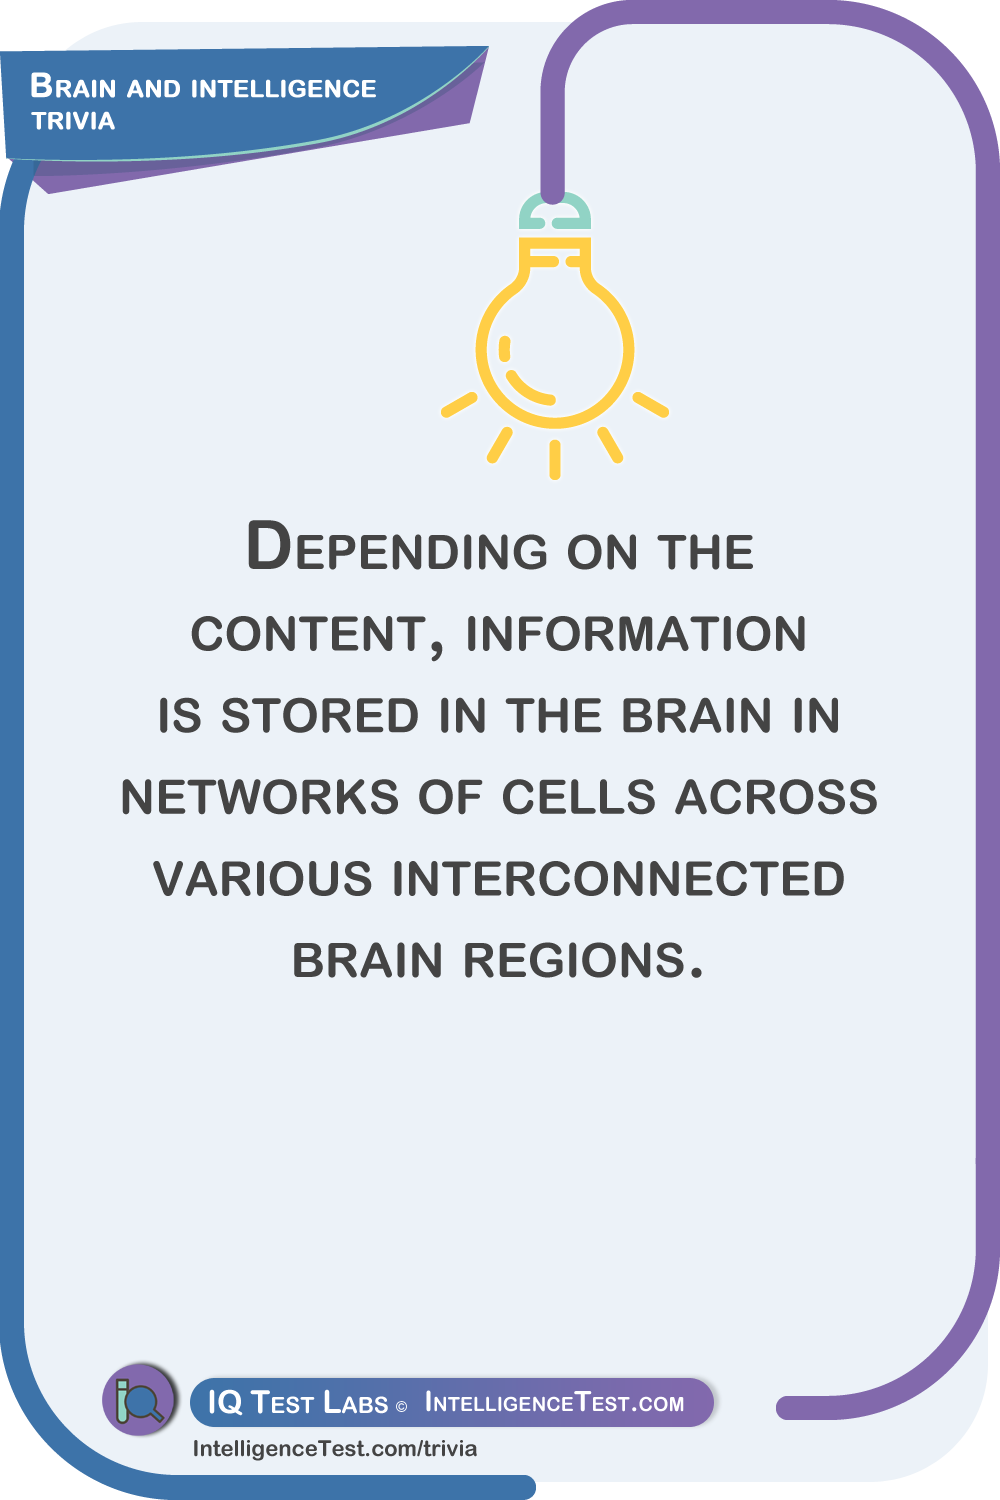 Depending on the content, information is stored in the brain in networks of cells across various interconnected brain regions.